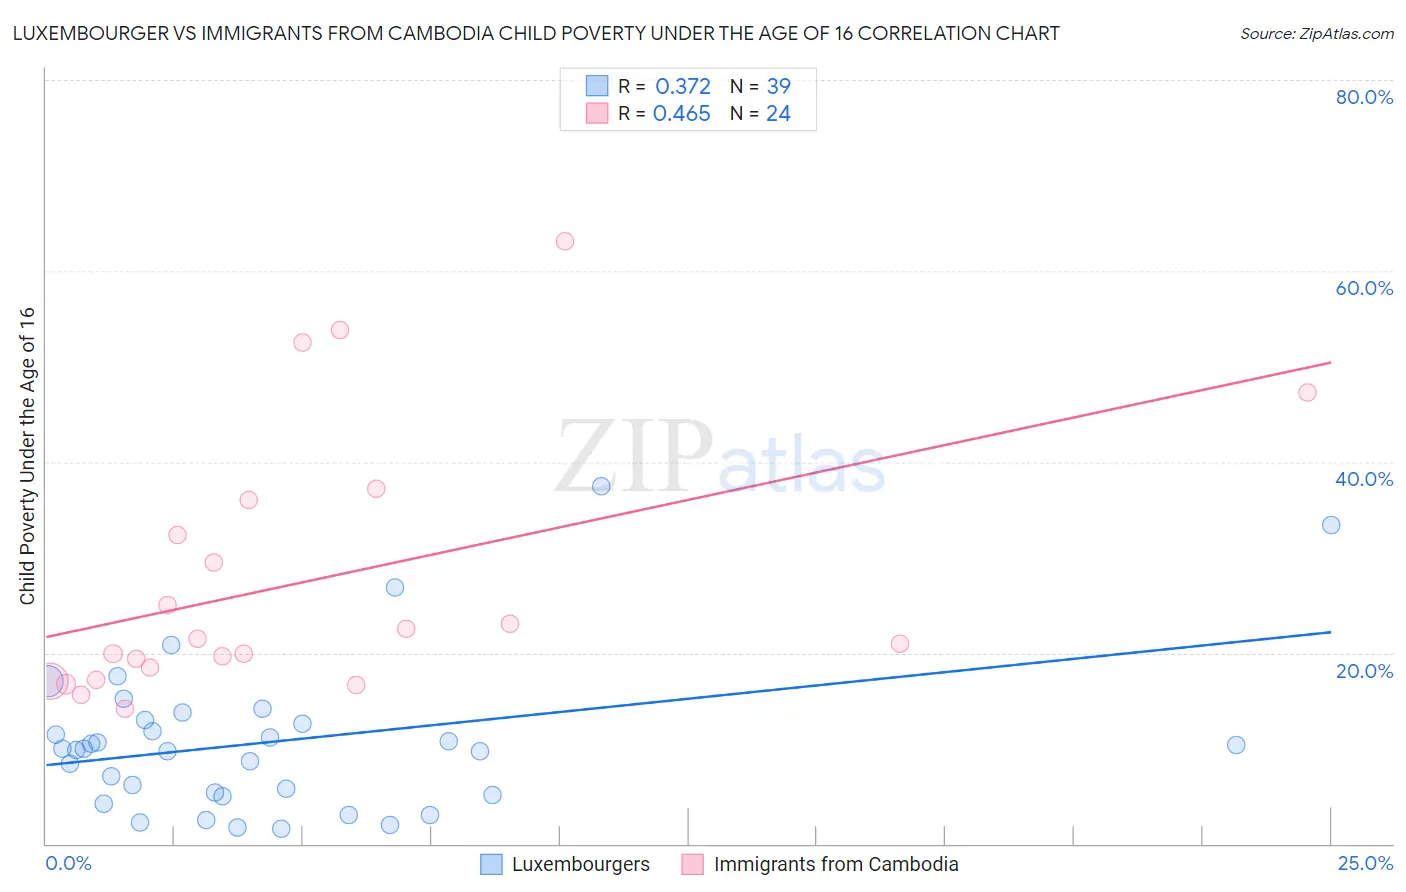 Luxembourger vs Immigrants from Cambodia Child Poverty Under the Age of 16